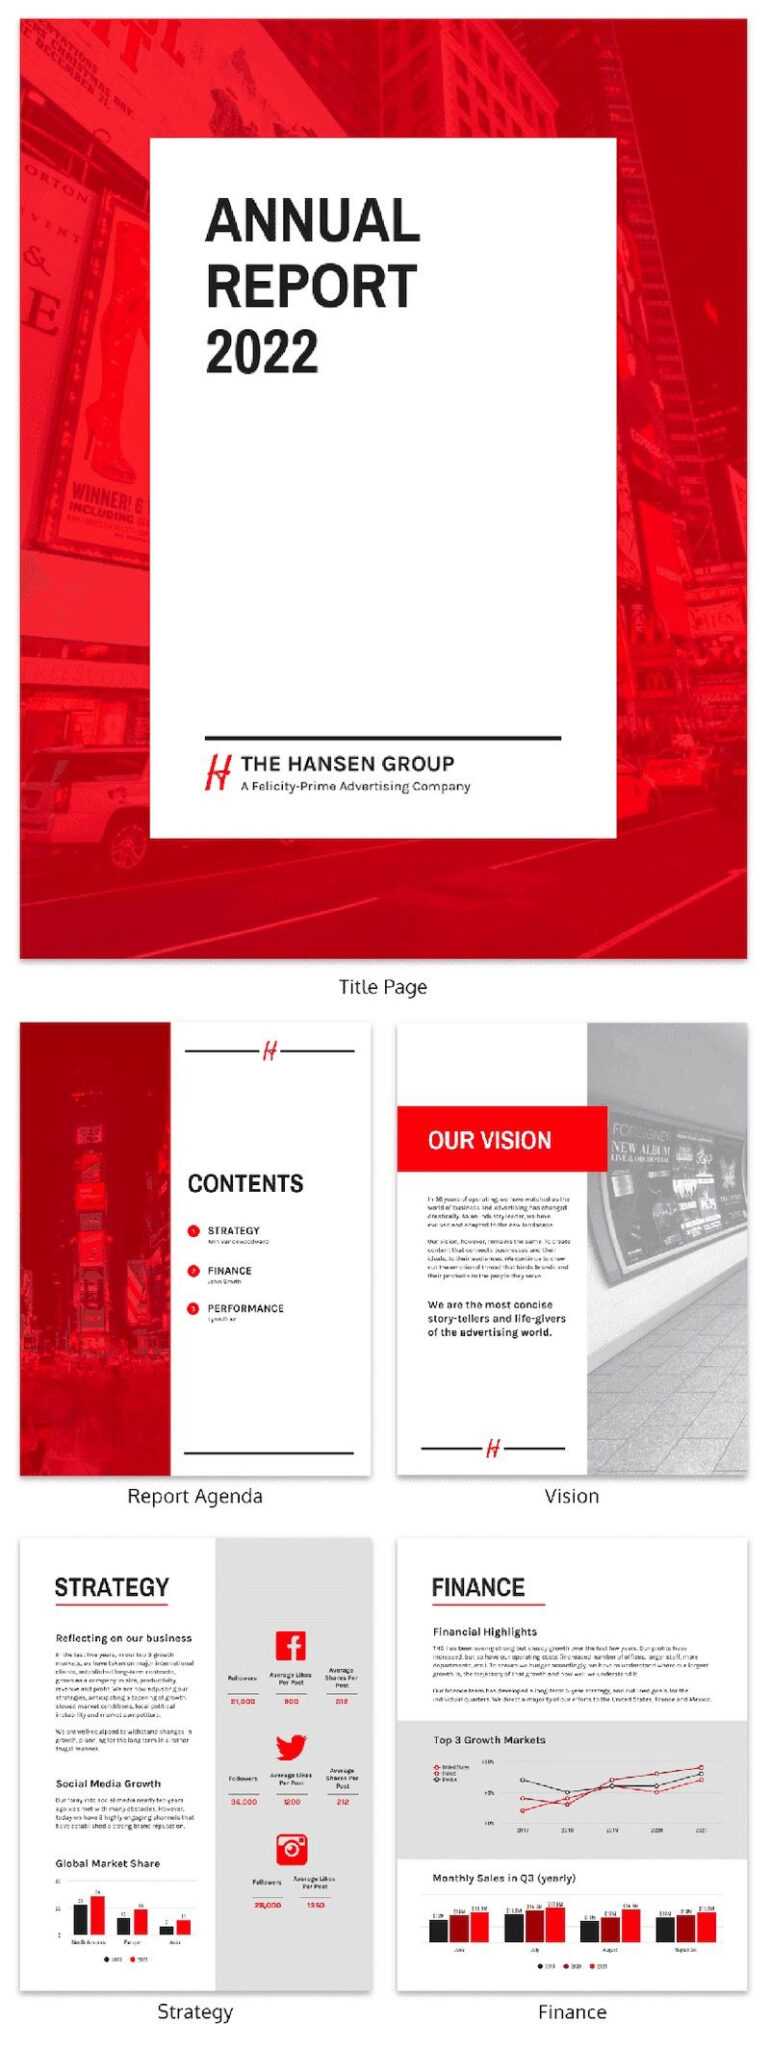 55-customizable-annual-report-design-templates-examples-tips-in-hr